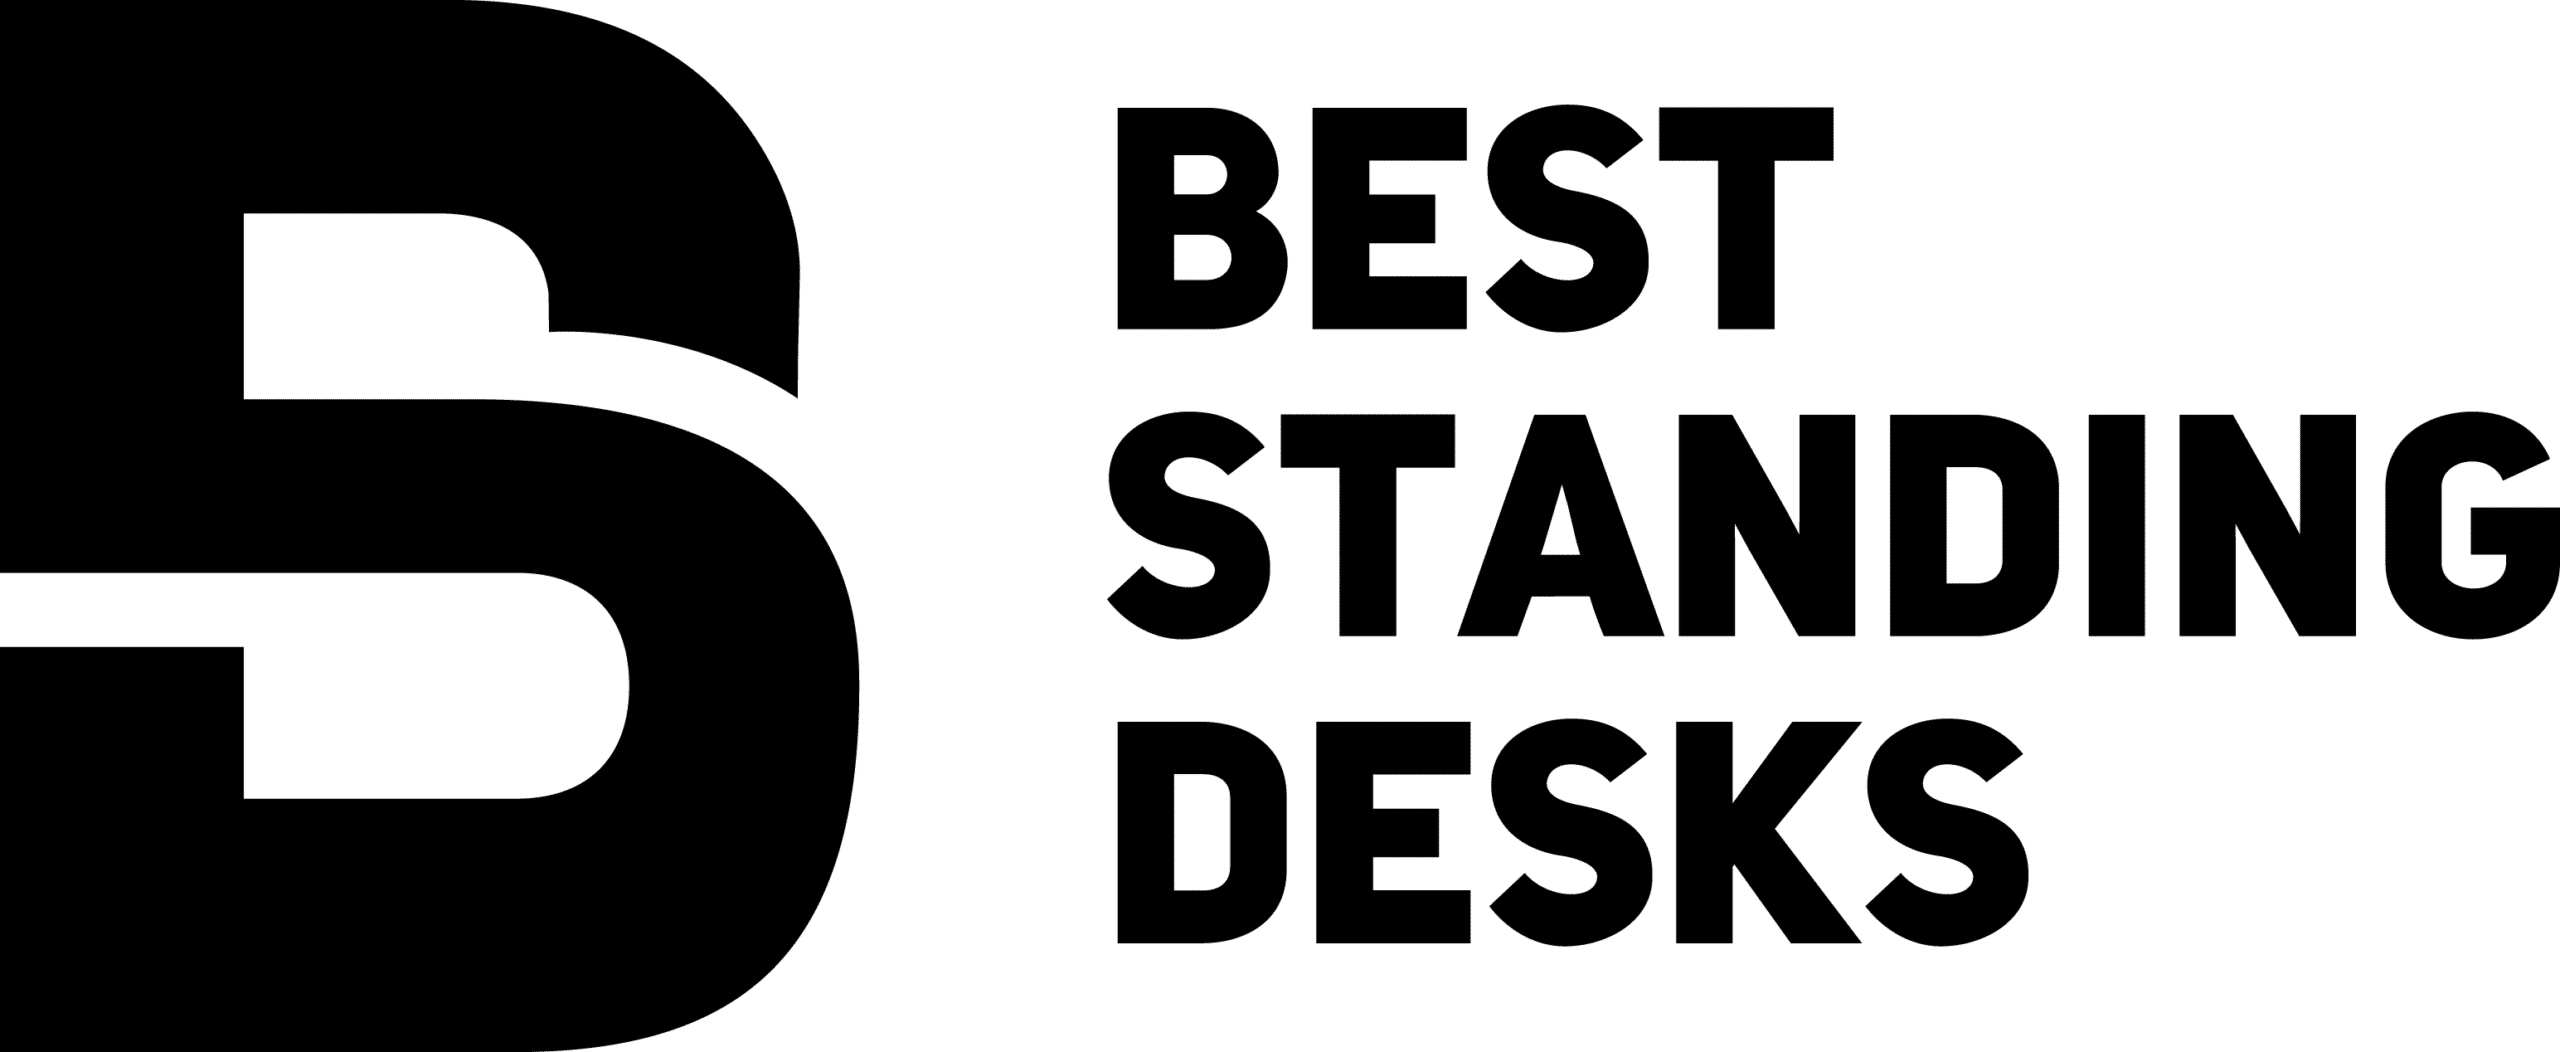 are-standing-desks-tax-deductible-in-australia-how-to-claim-in-5-steps